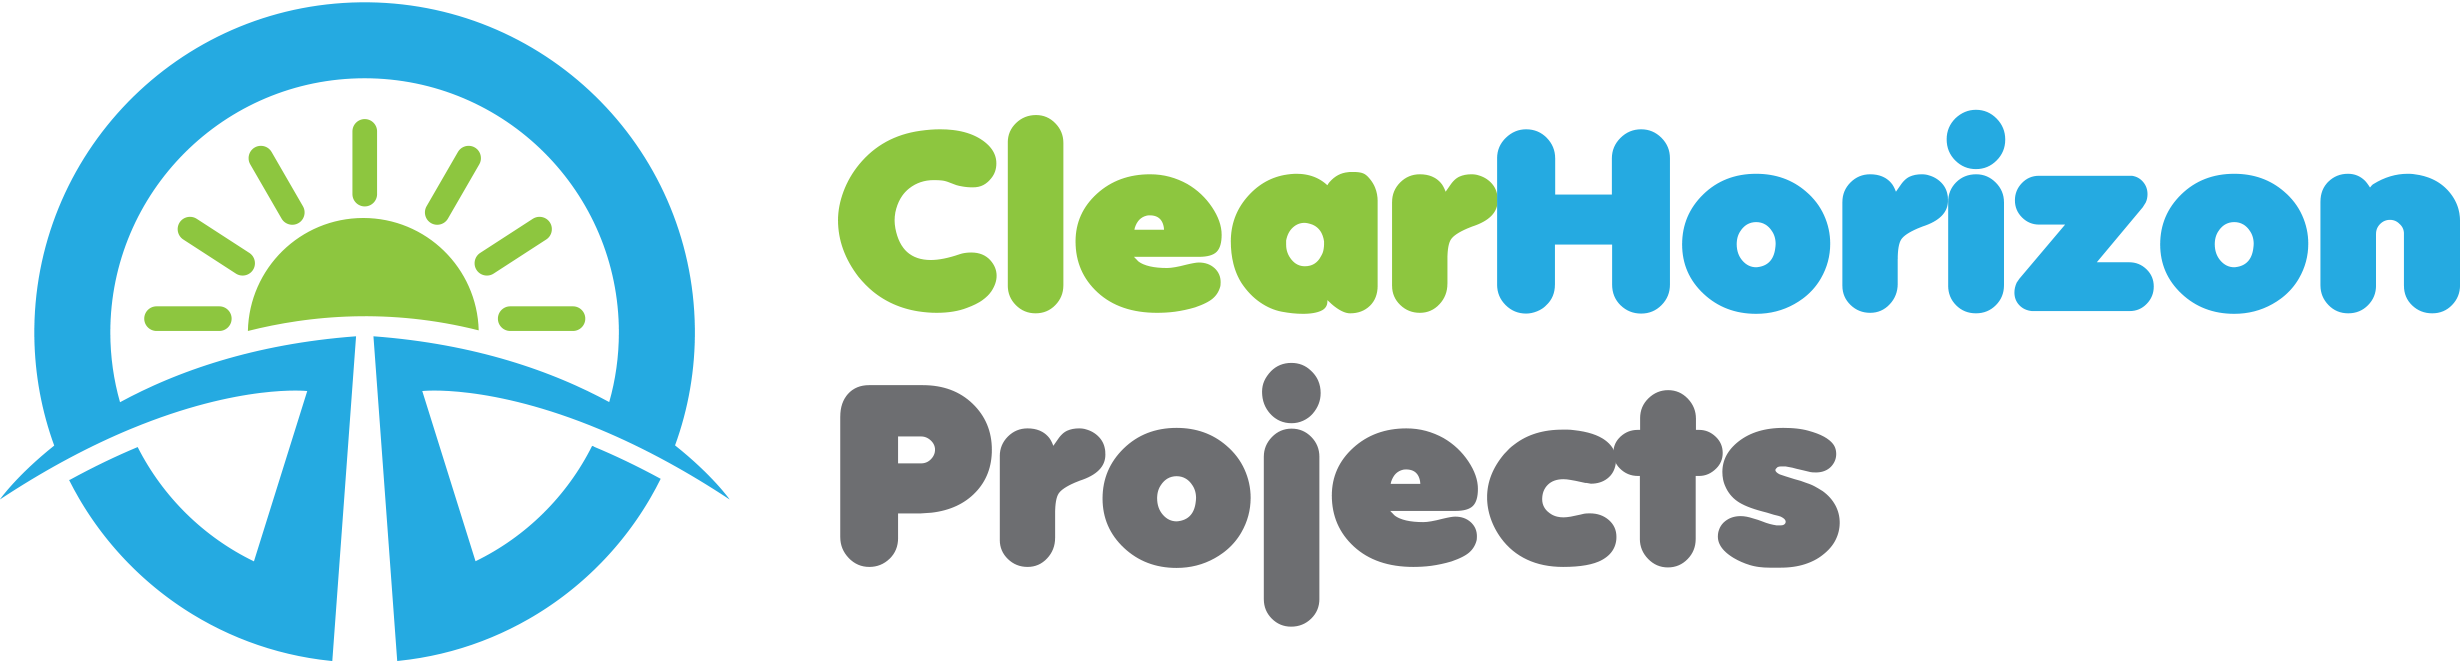 Clear Horizon Projects